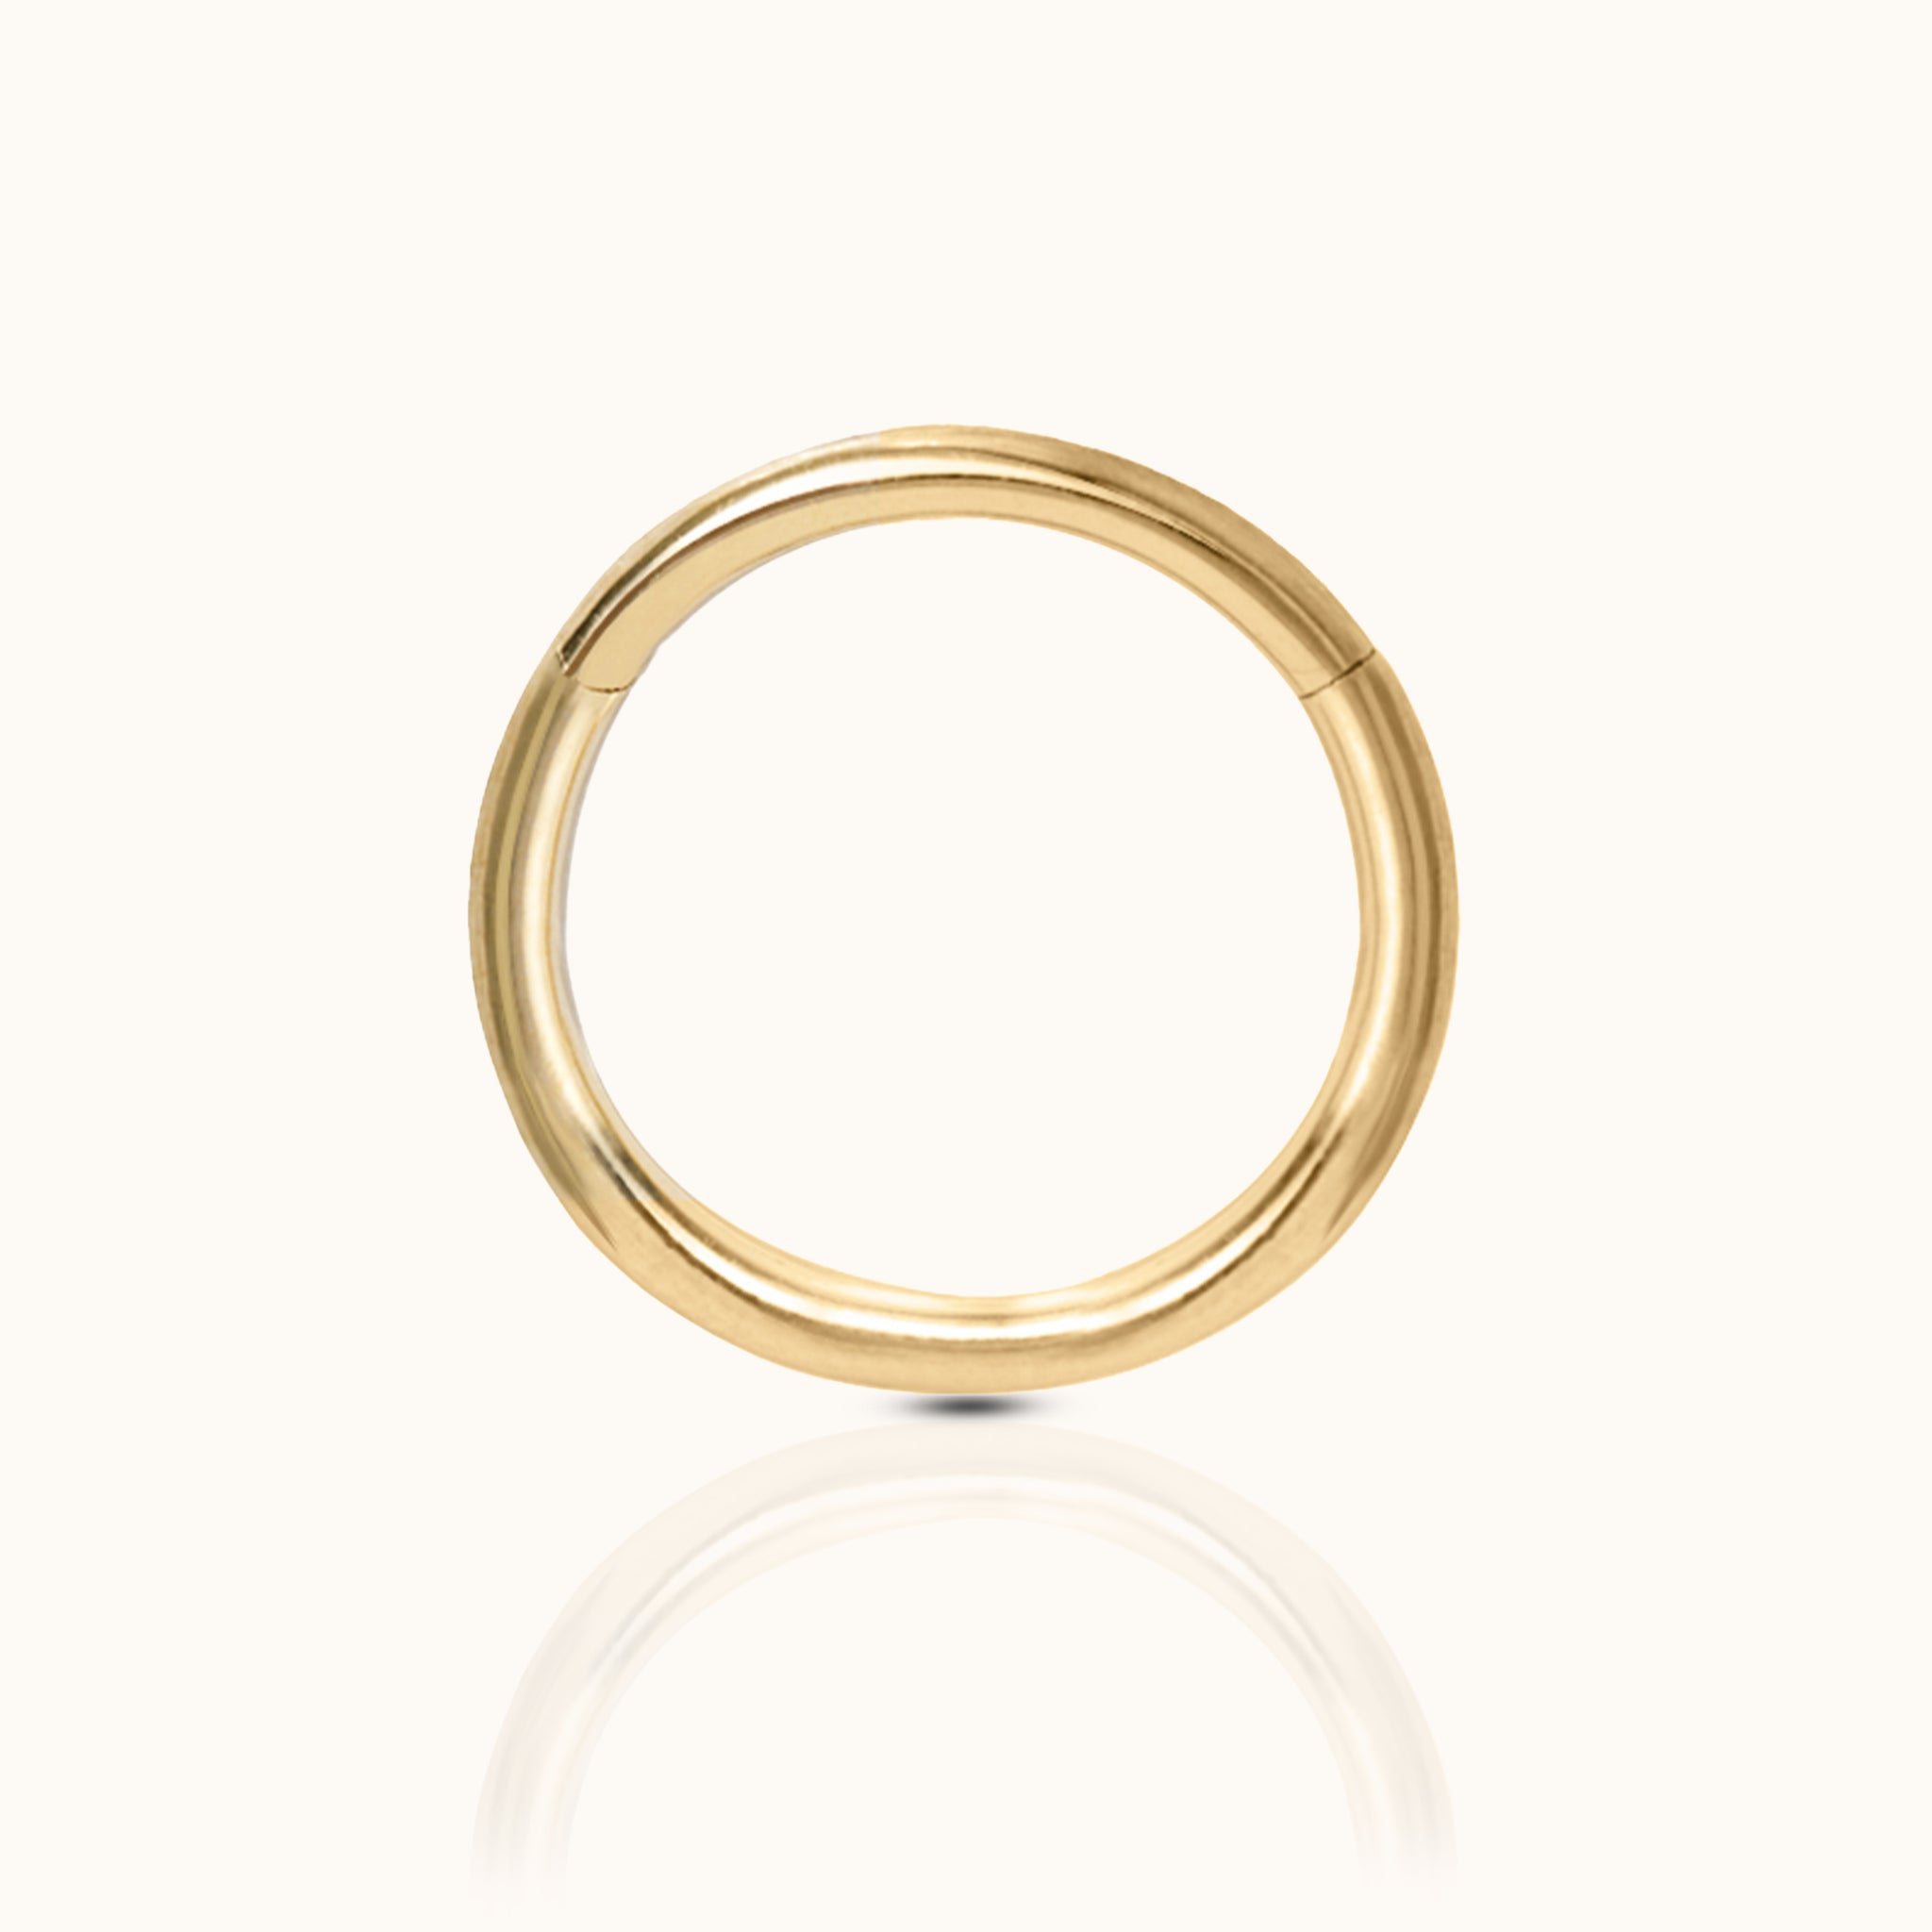 Classic Clicker 10mm Titanium PVD Gold Hinged Nap Hoop Earring by Doviana